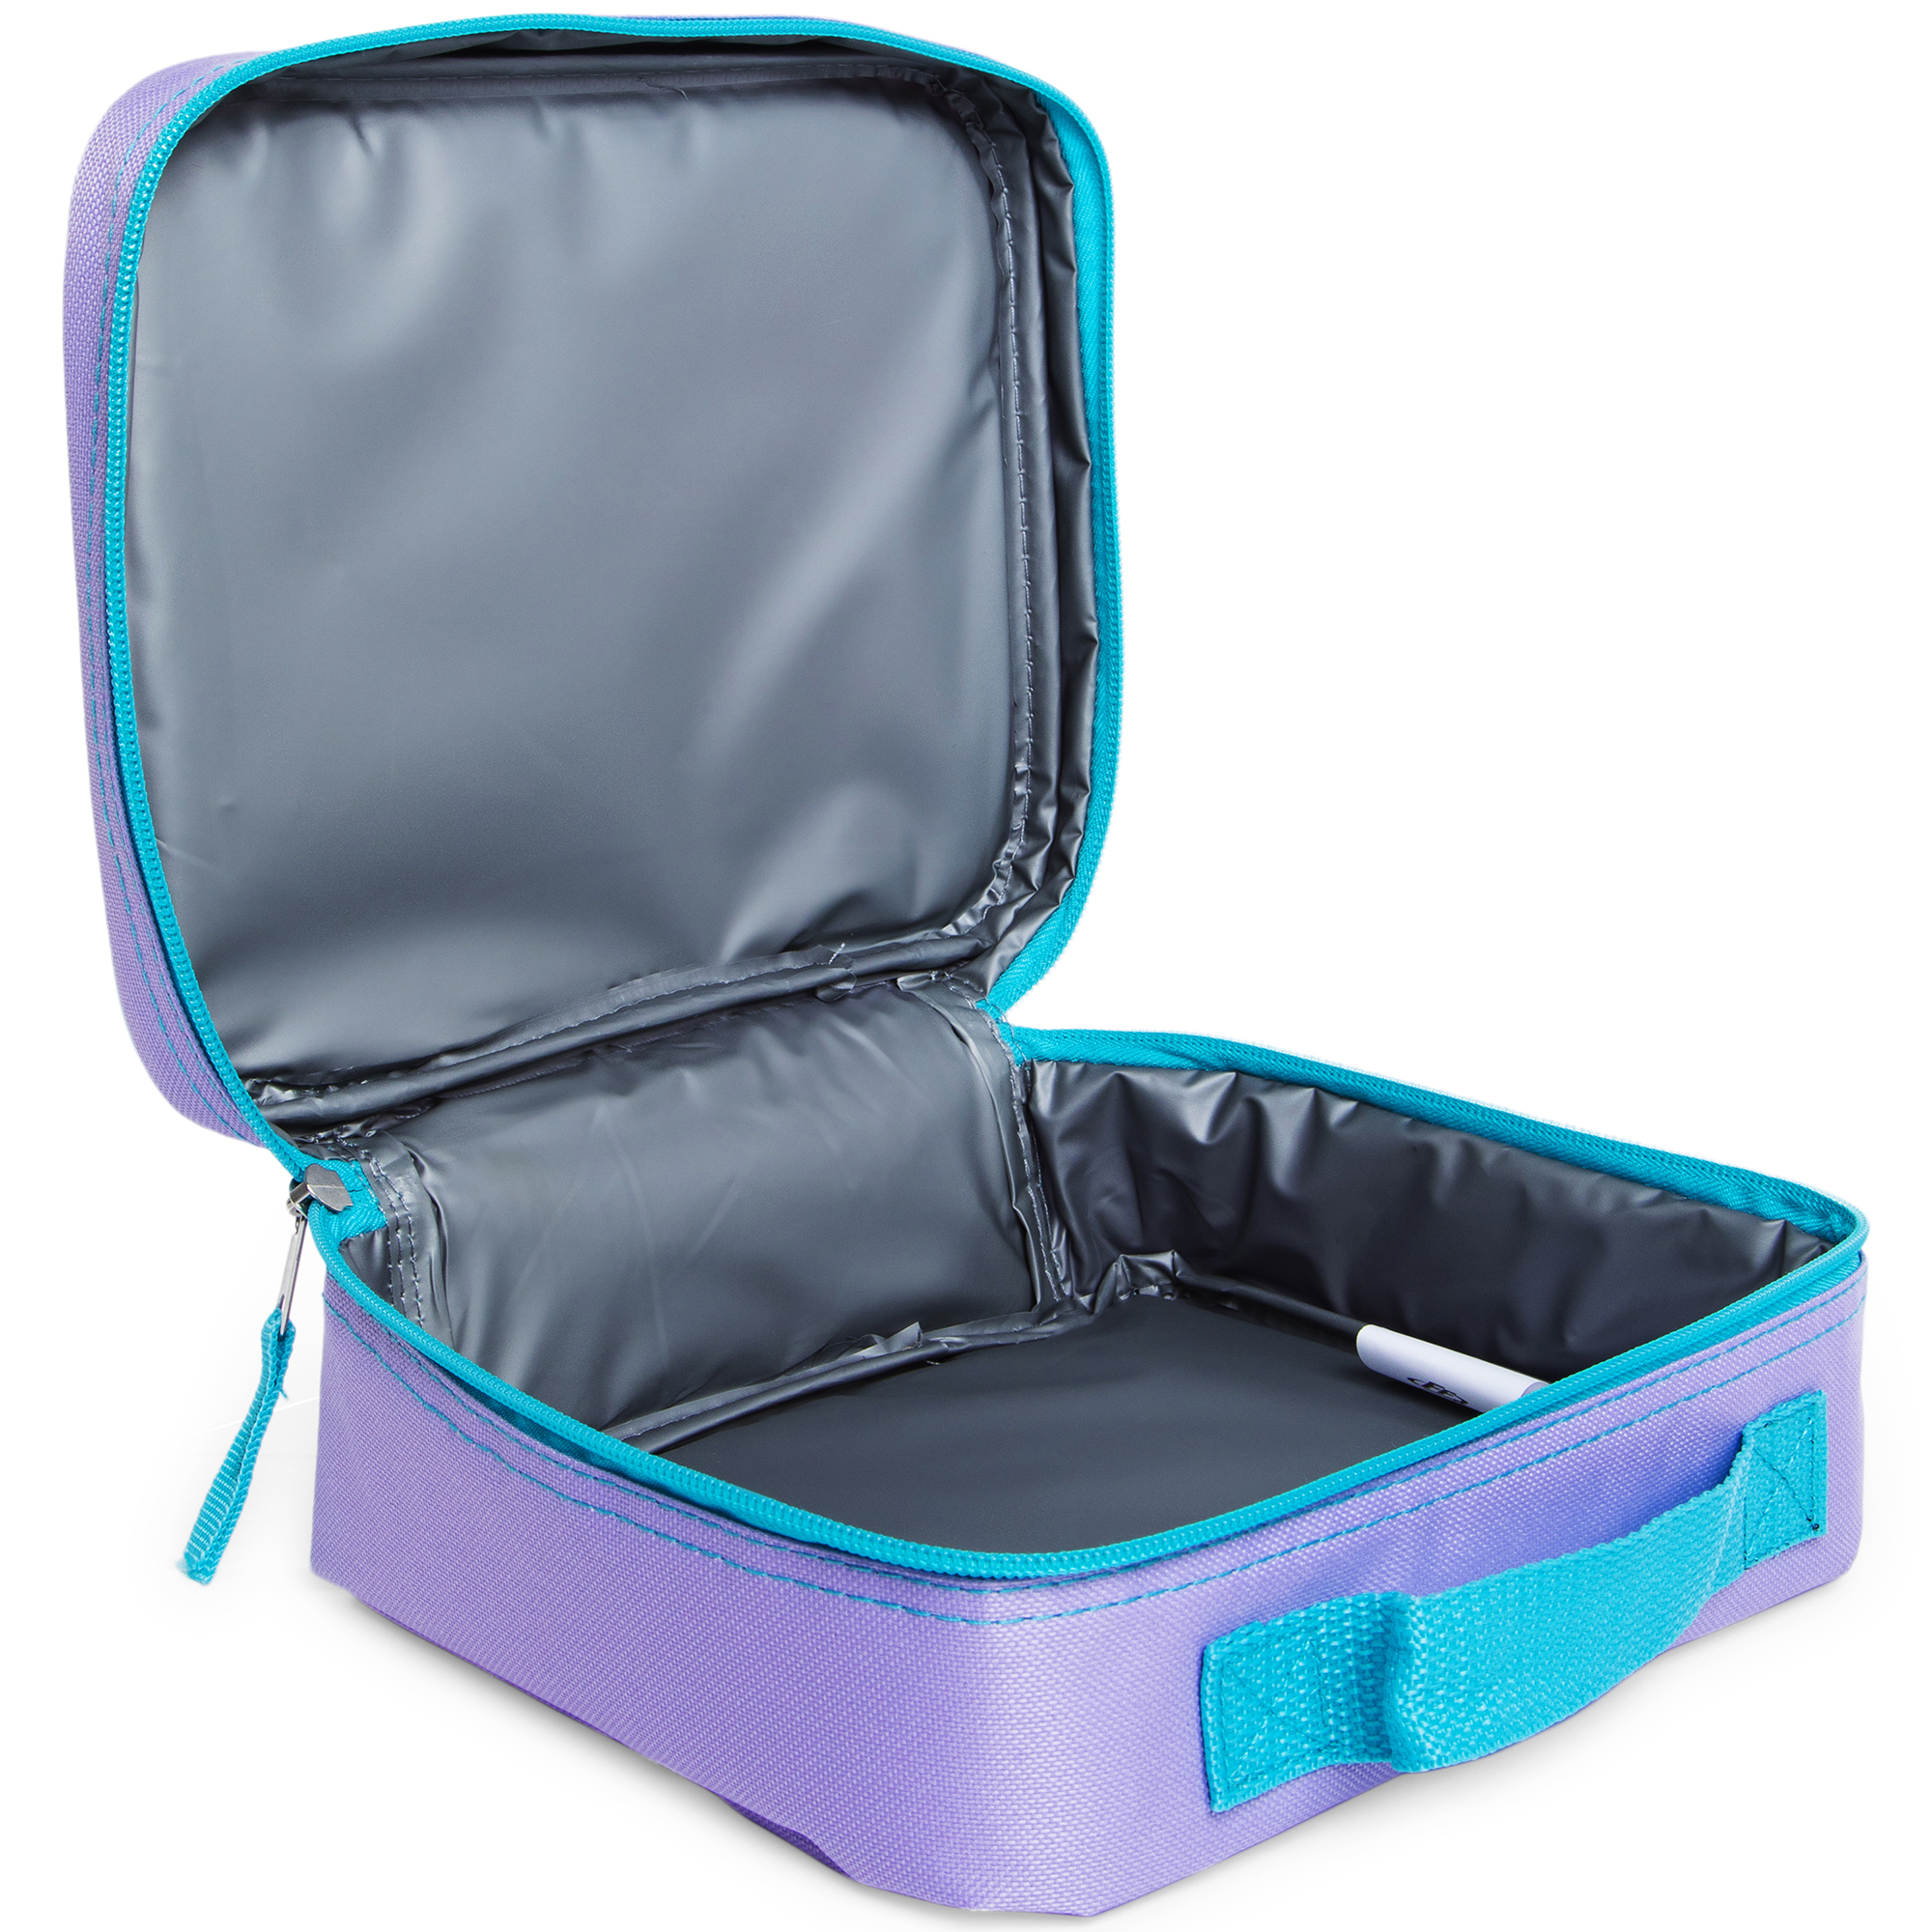 l.o.l surprise! soft insulated lunchbox cooler